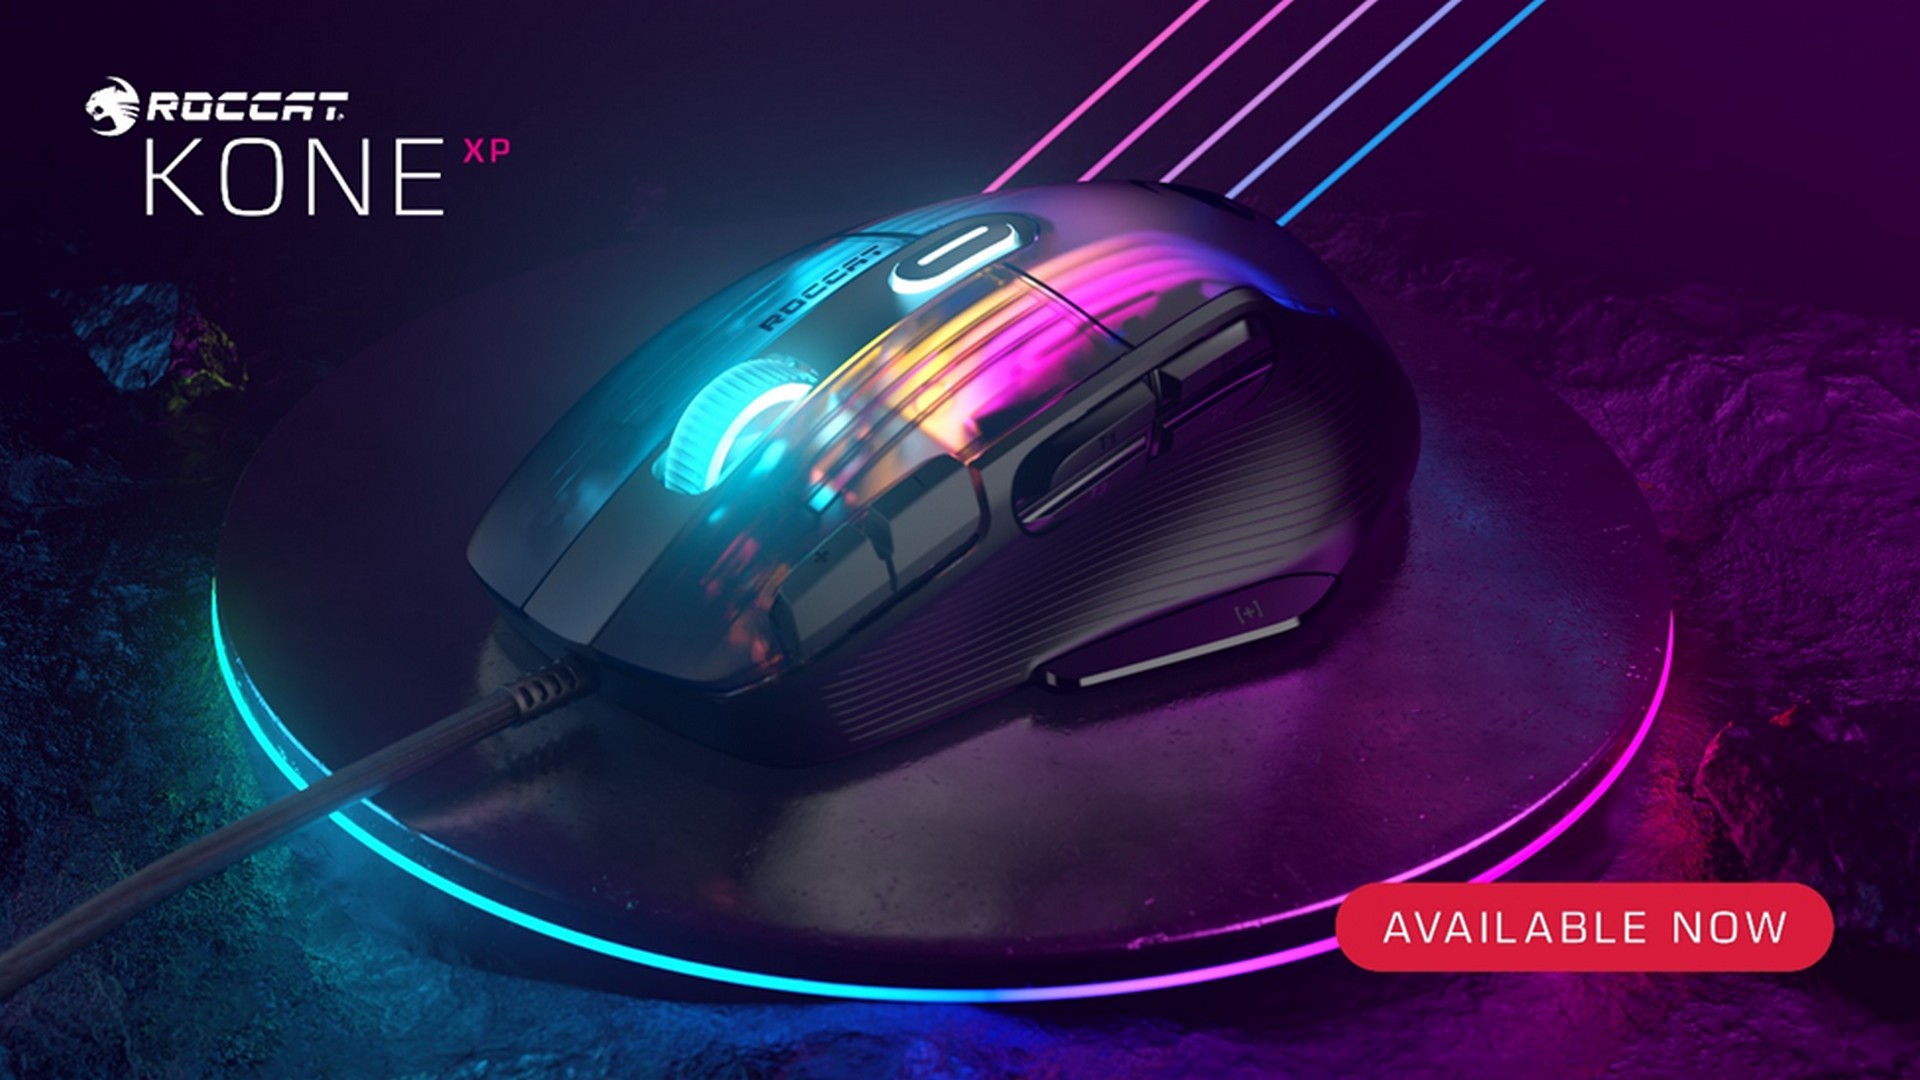 ROCCAT’s All-New KONE XP Gaming Mouse Is Out Now